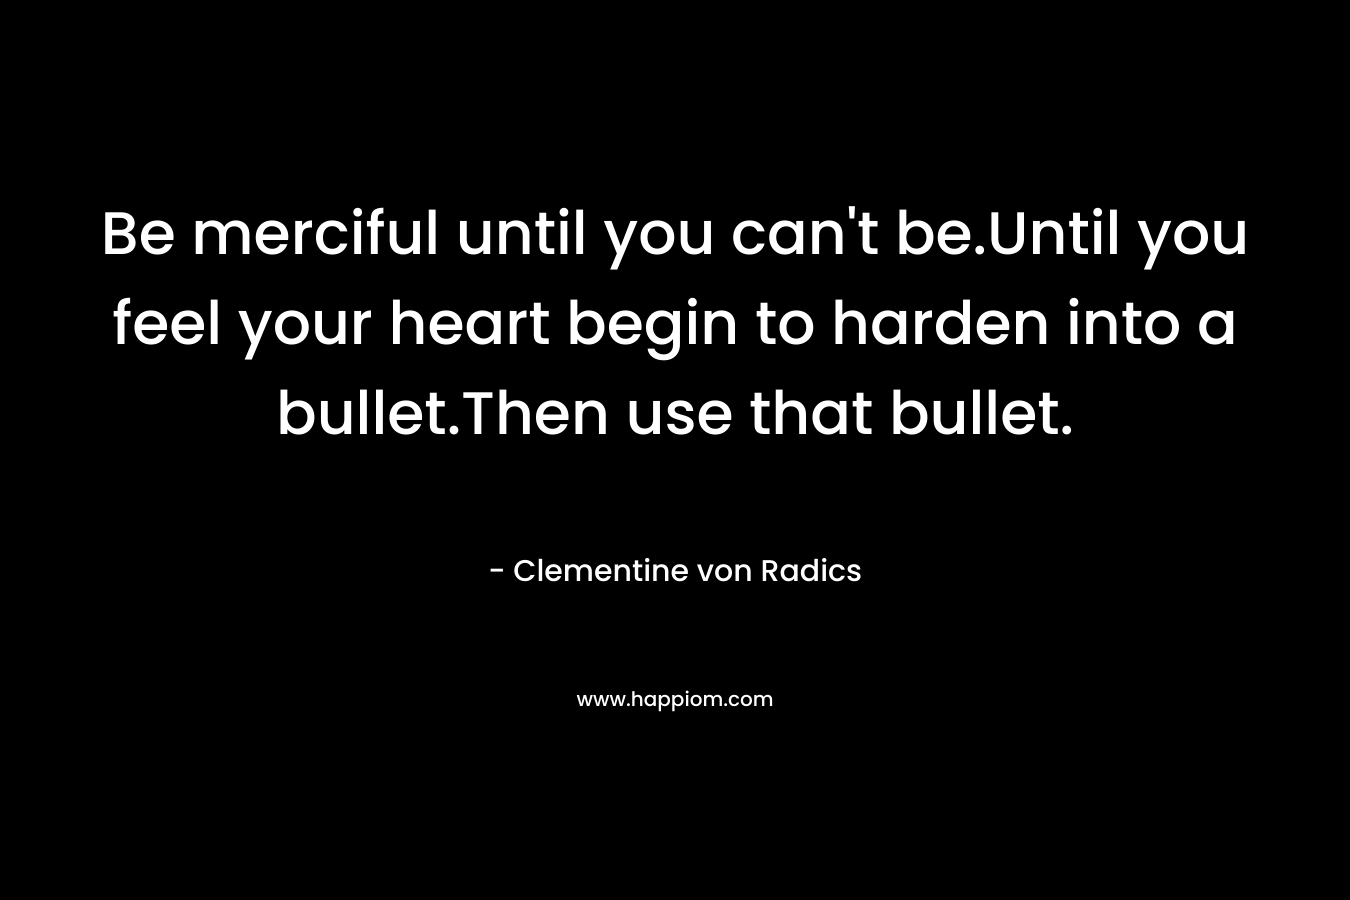 Be merciful until you can't be.Until you feel your heart begin to harden into a bullet.Then use that bullet.